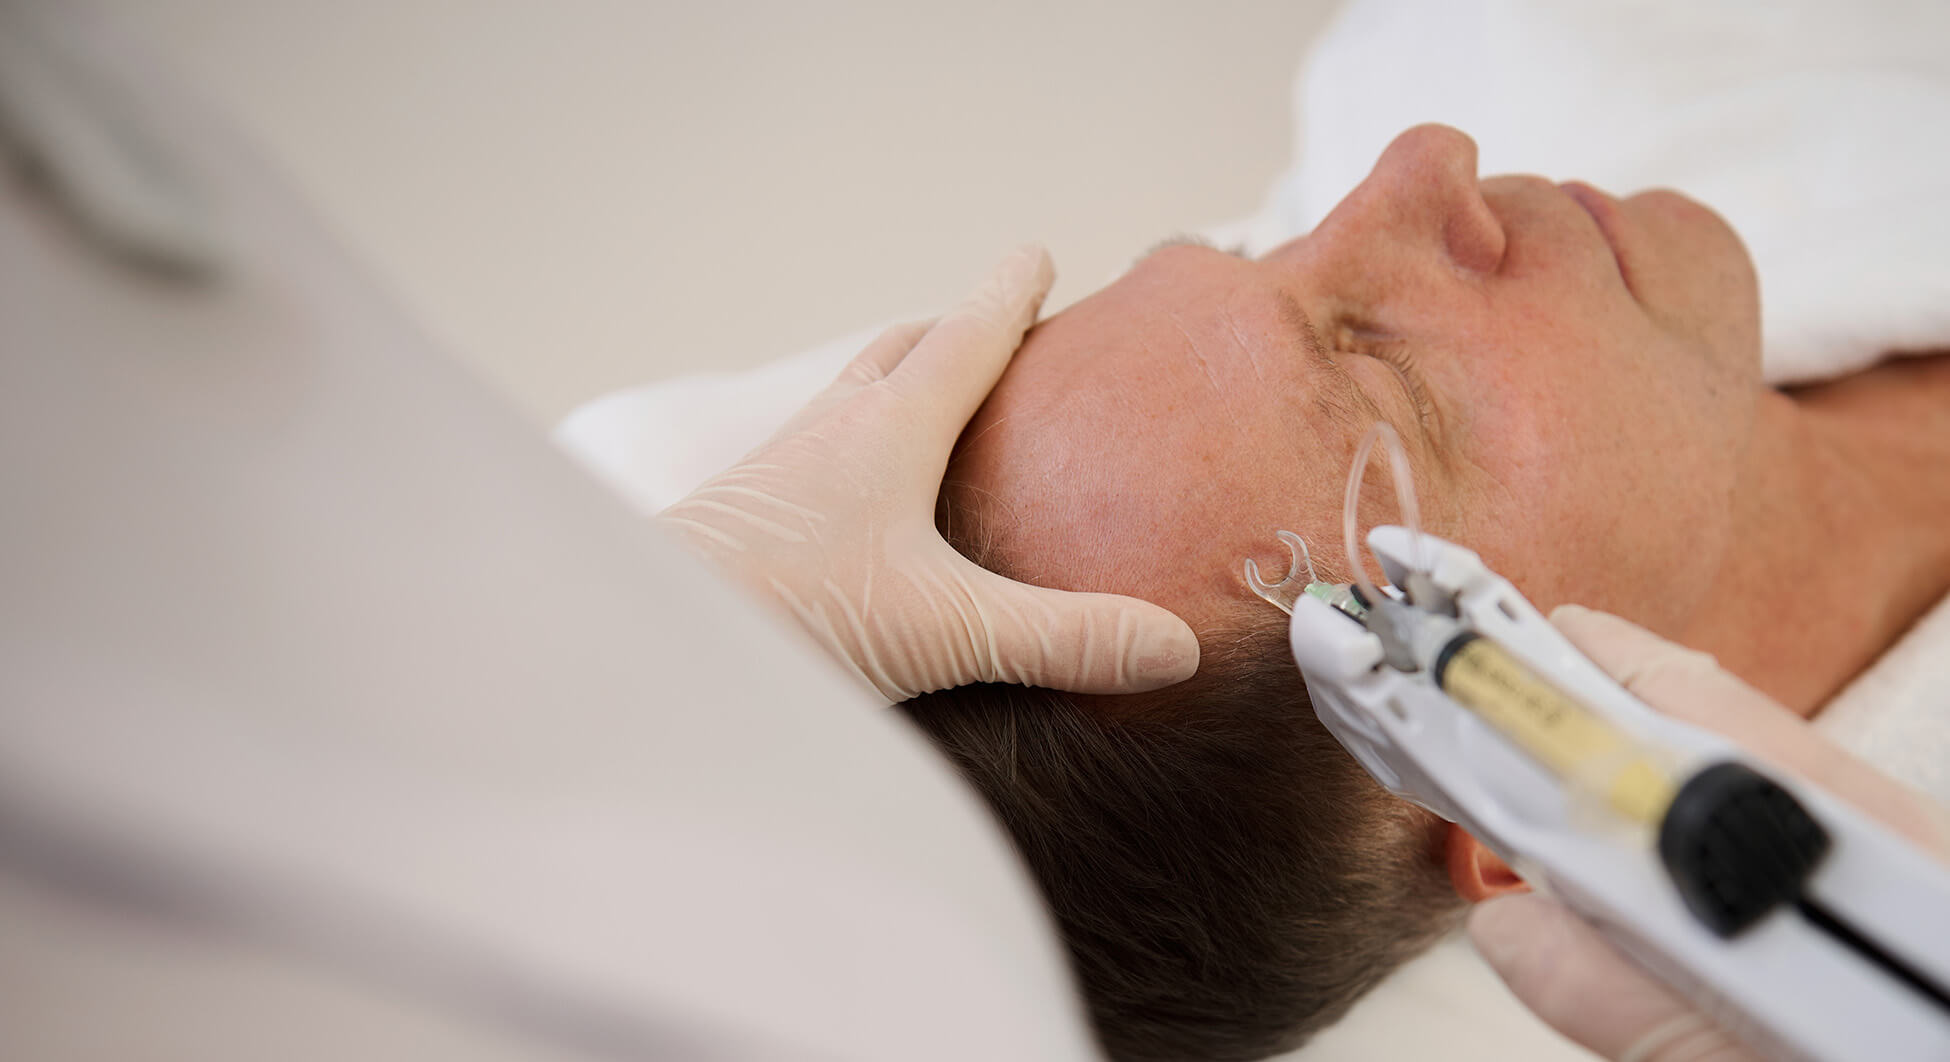 Mesotherapy skin treatment